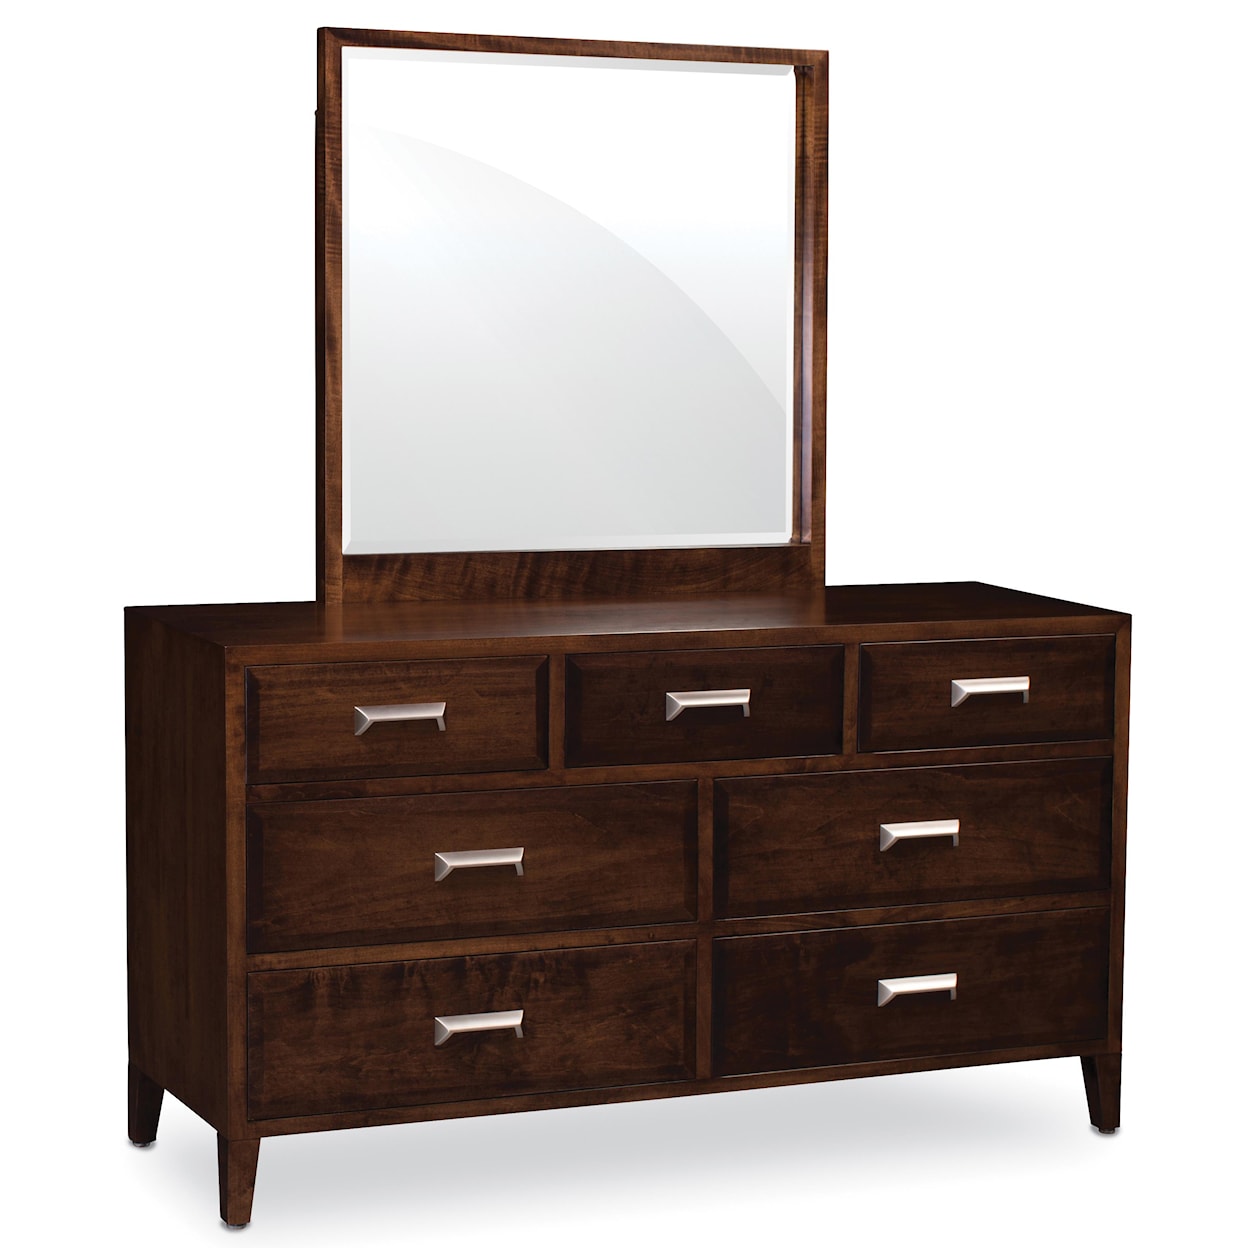 Simply Amish Beaumont SA Dresser and Mirror Set